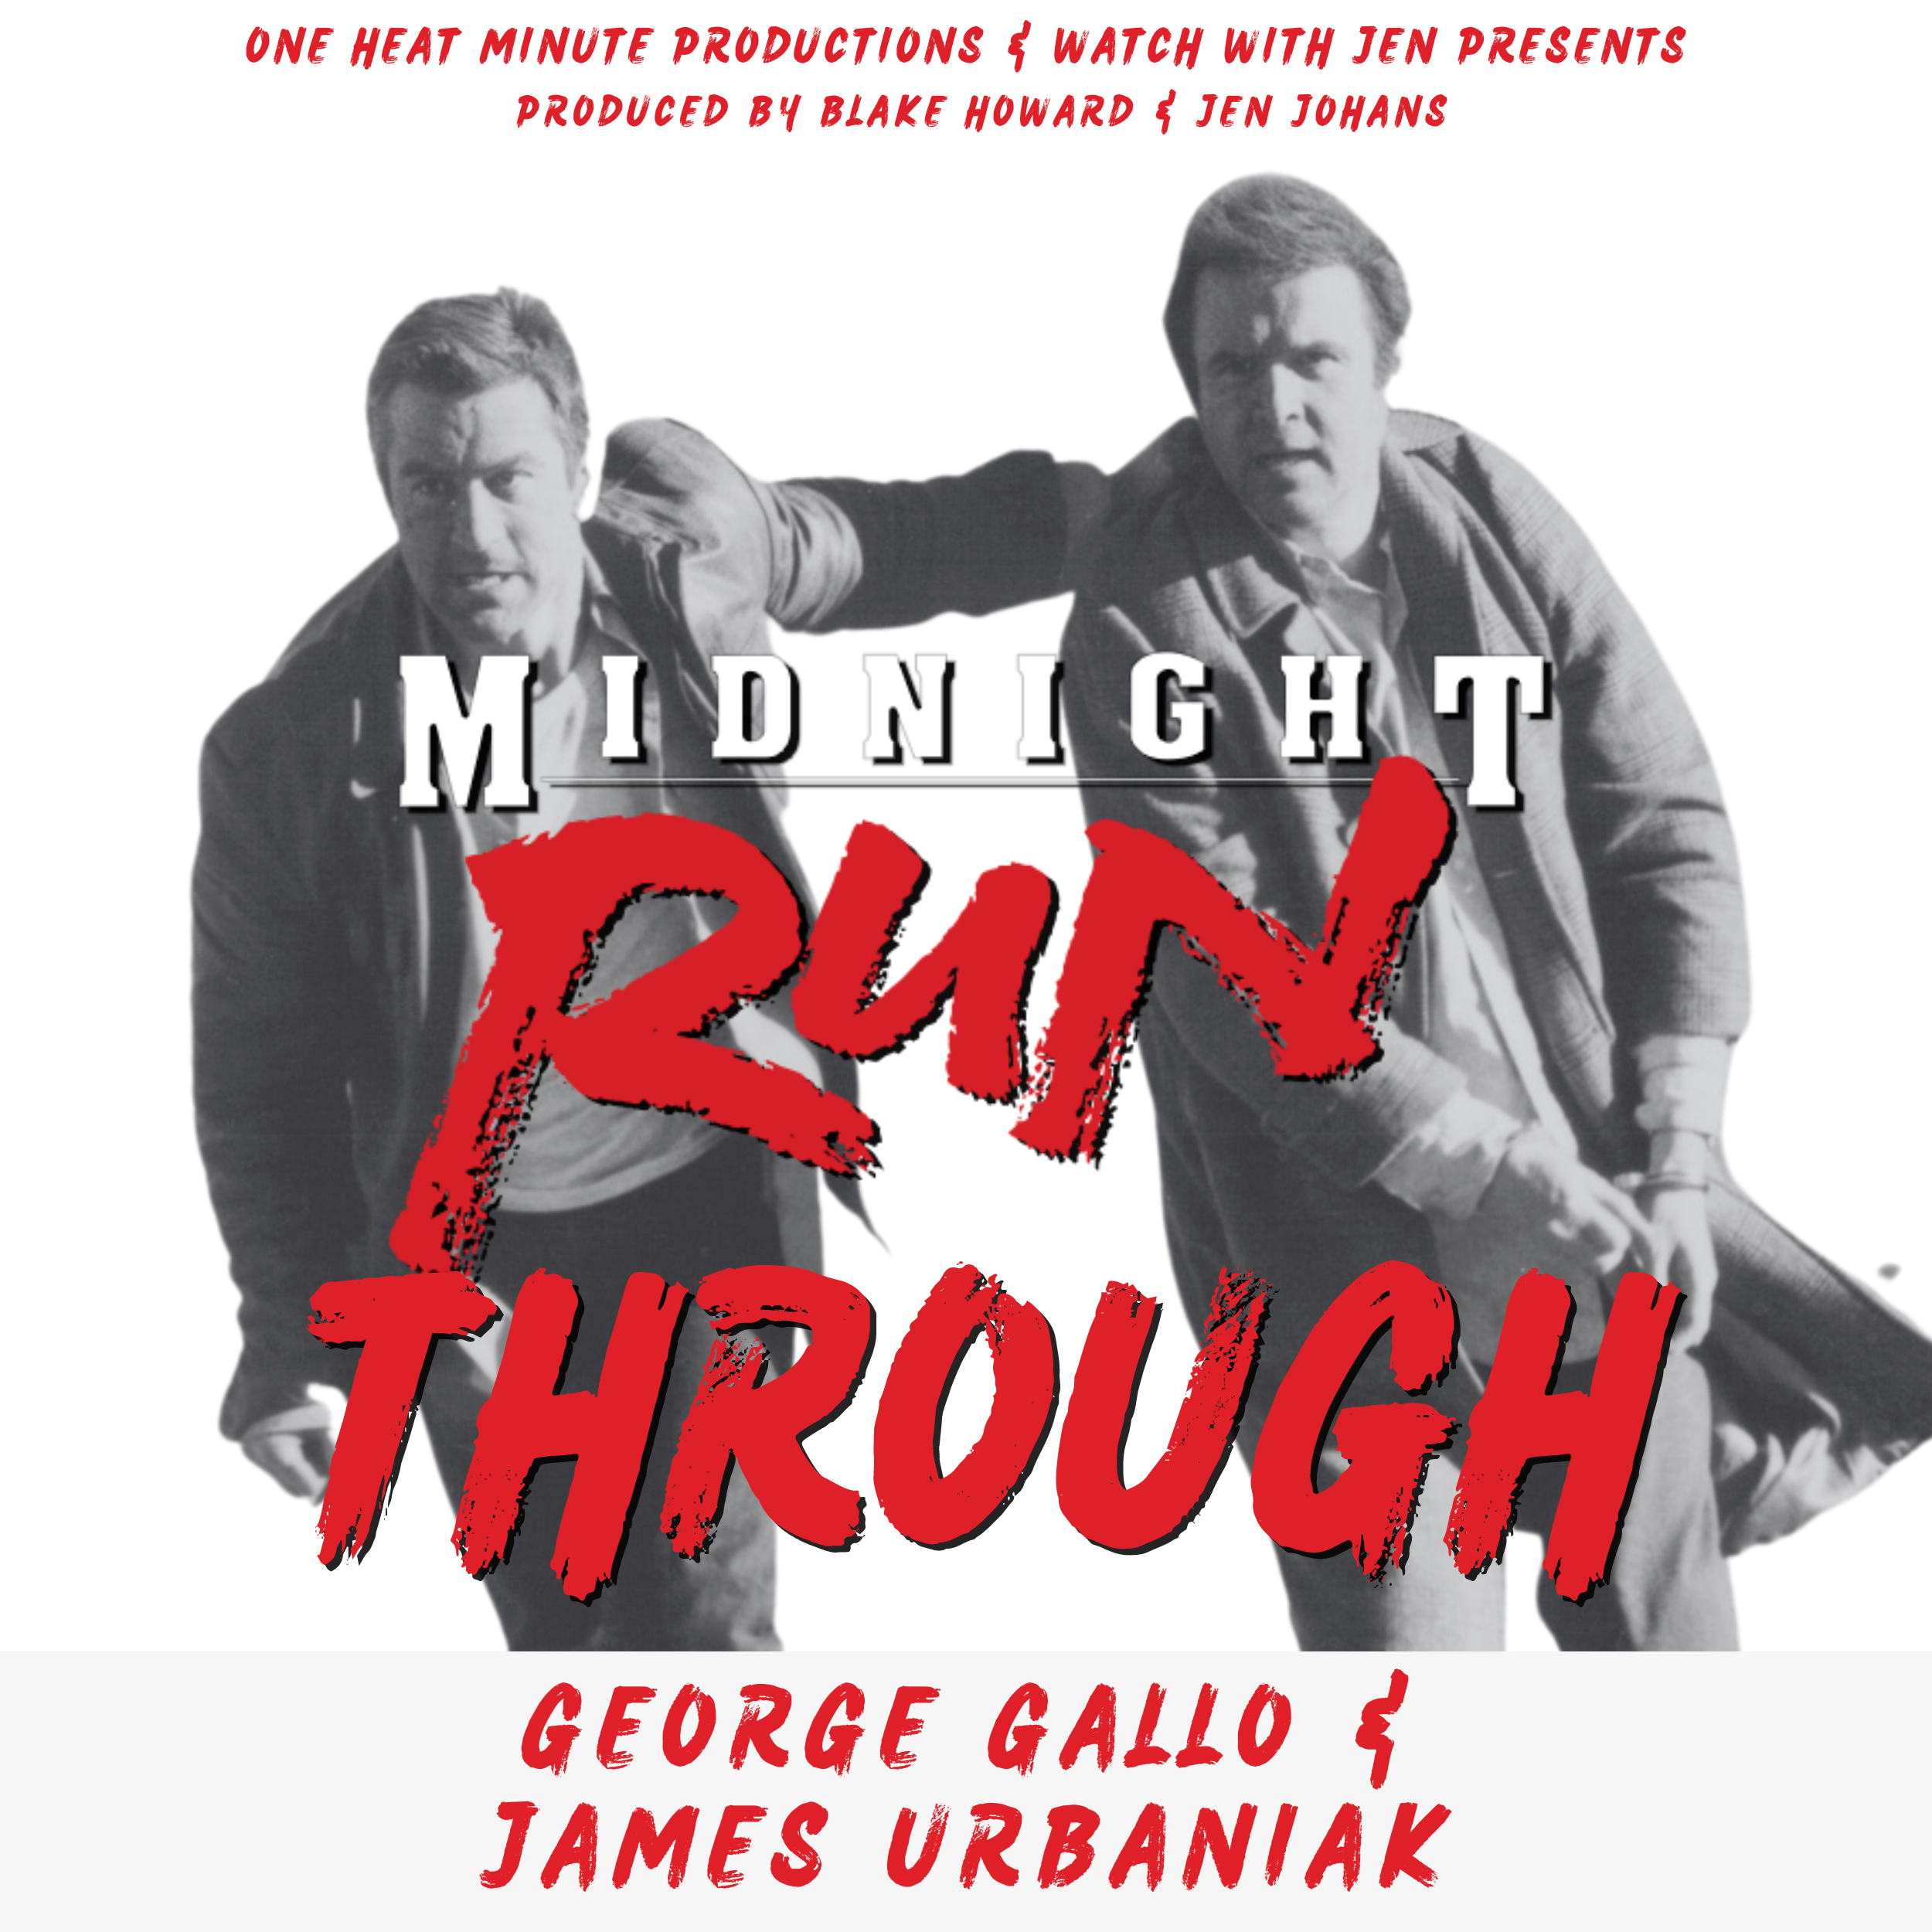 MIDNIGHT RUN-THROUGH - Episode 12 (The Finale) - George Gallo & James Urbaniak (From One Heat Minute Productions & Watch With Jen)